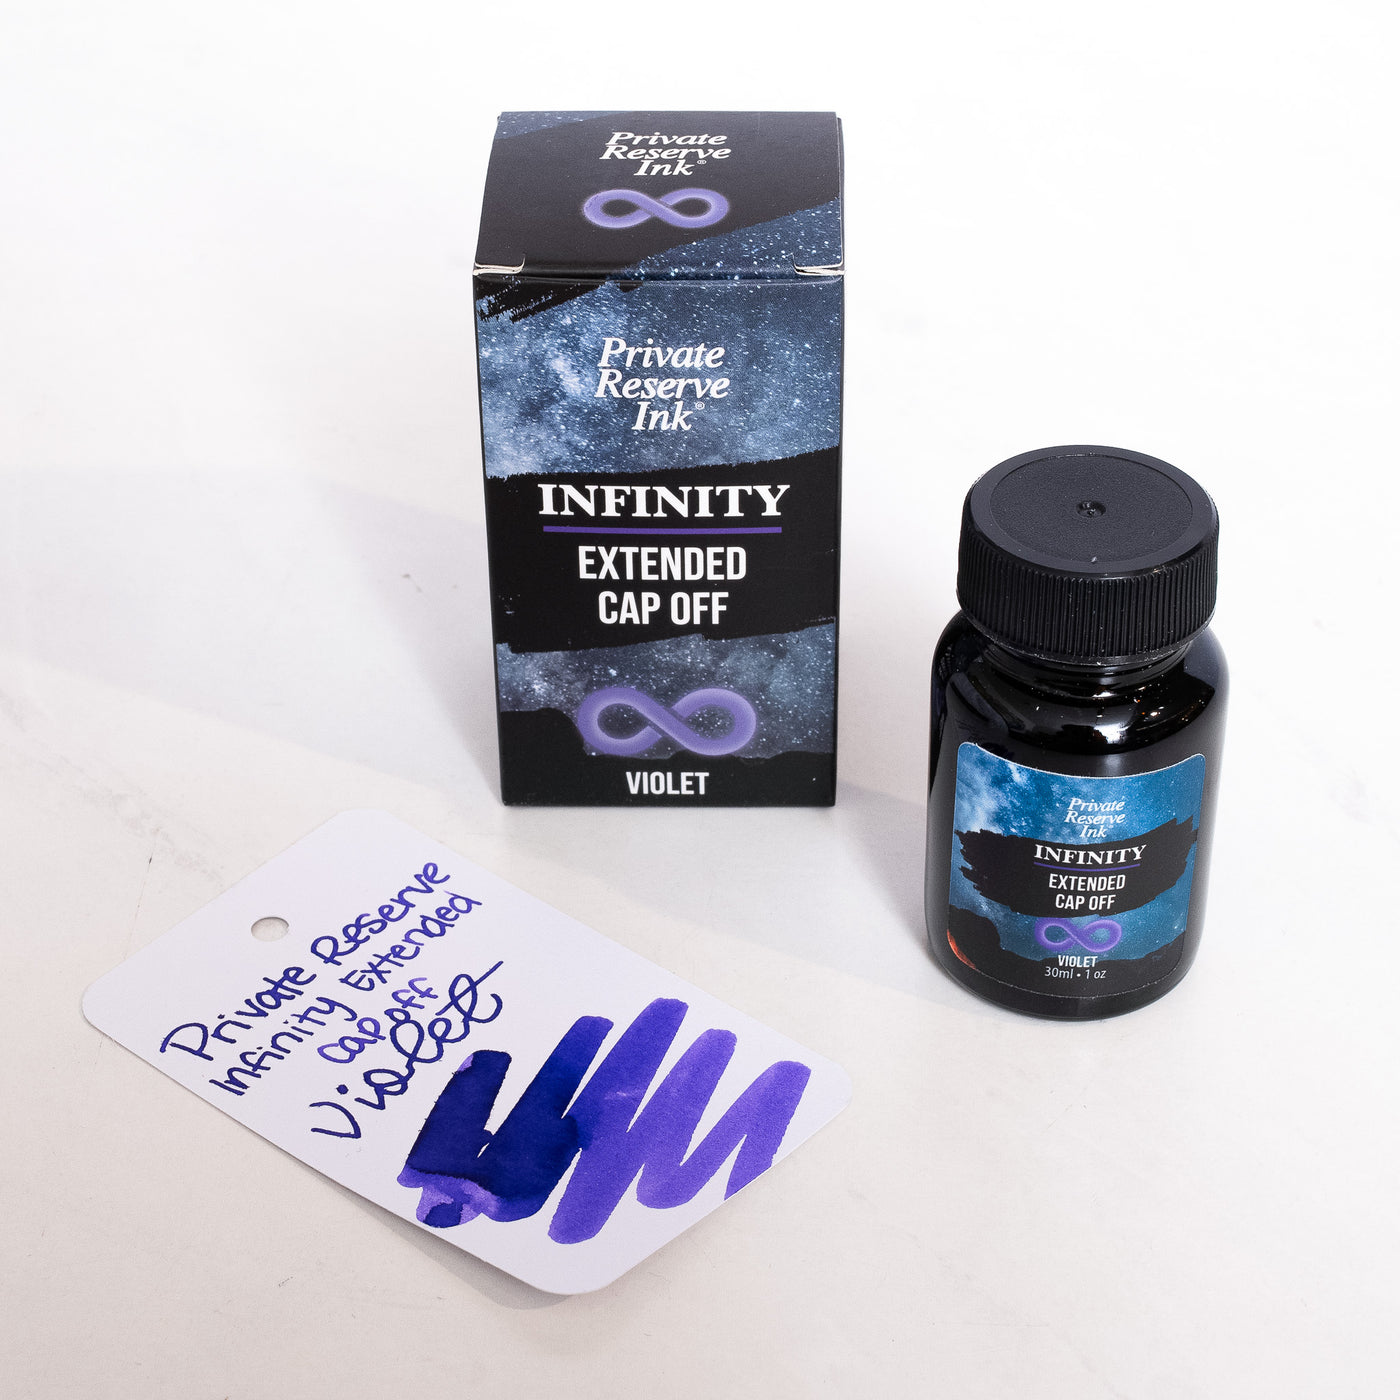 Private Reserve Infinity Extended Cap Off Violet Ink Bottle